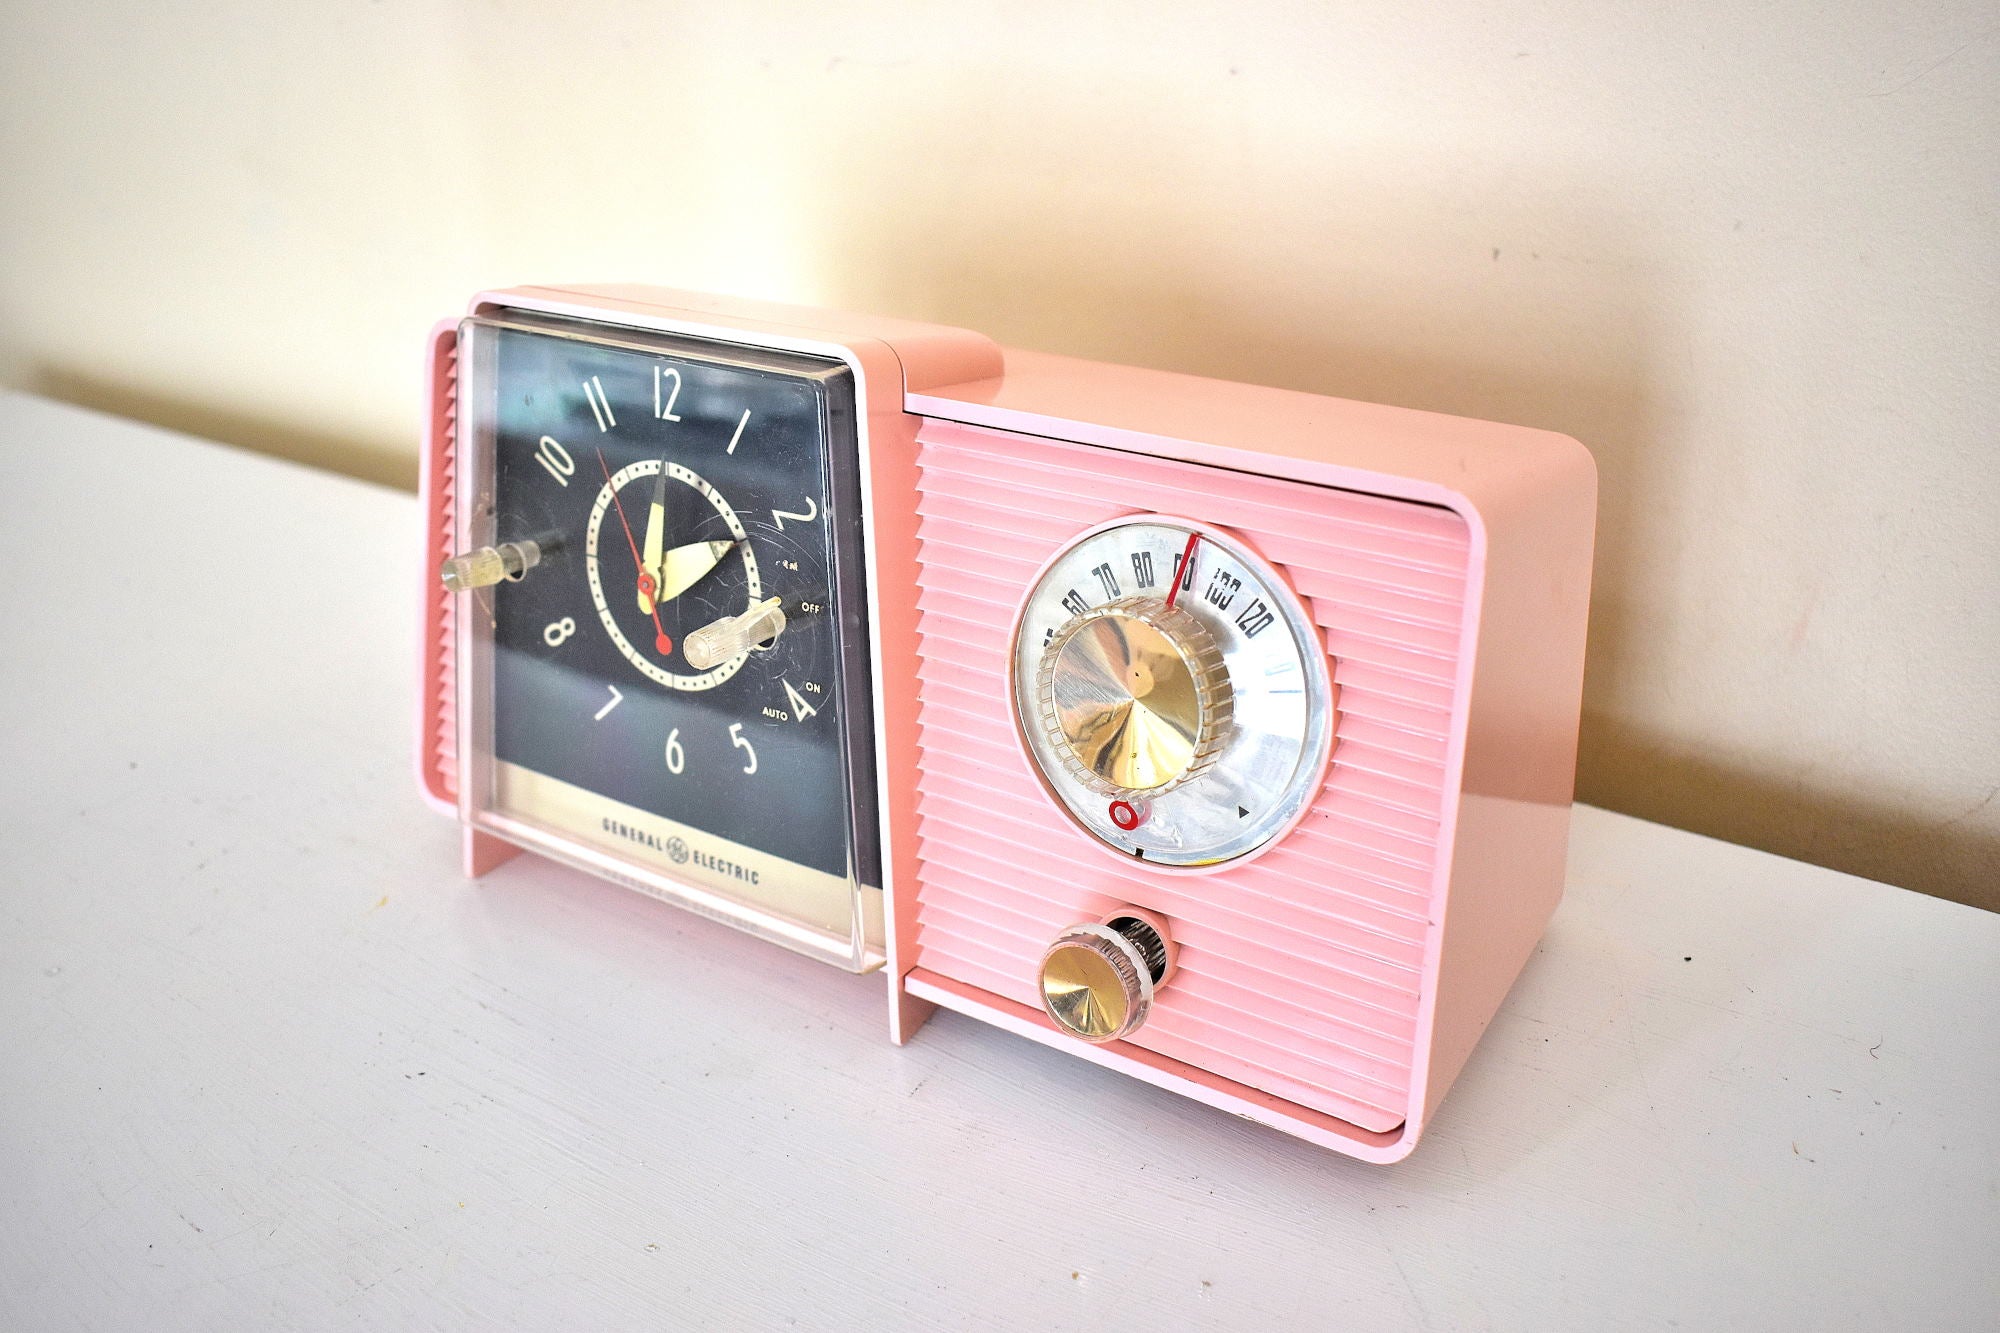 Chiffon Pink 1958 GE General Electric Model C-406A AM Vintage Vacuum Tube Radio Little Cutie in Excellent Condition!